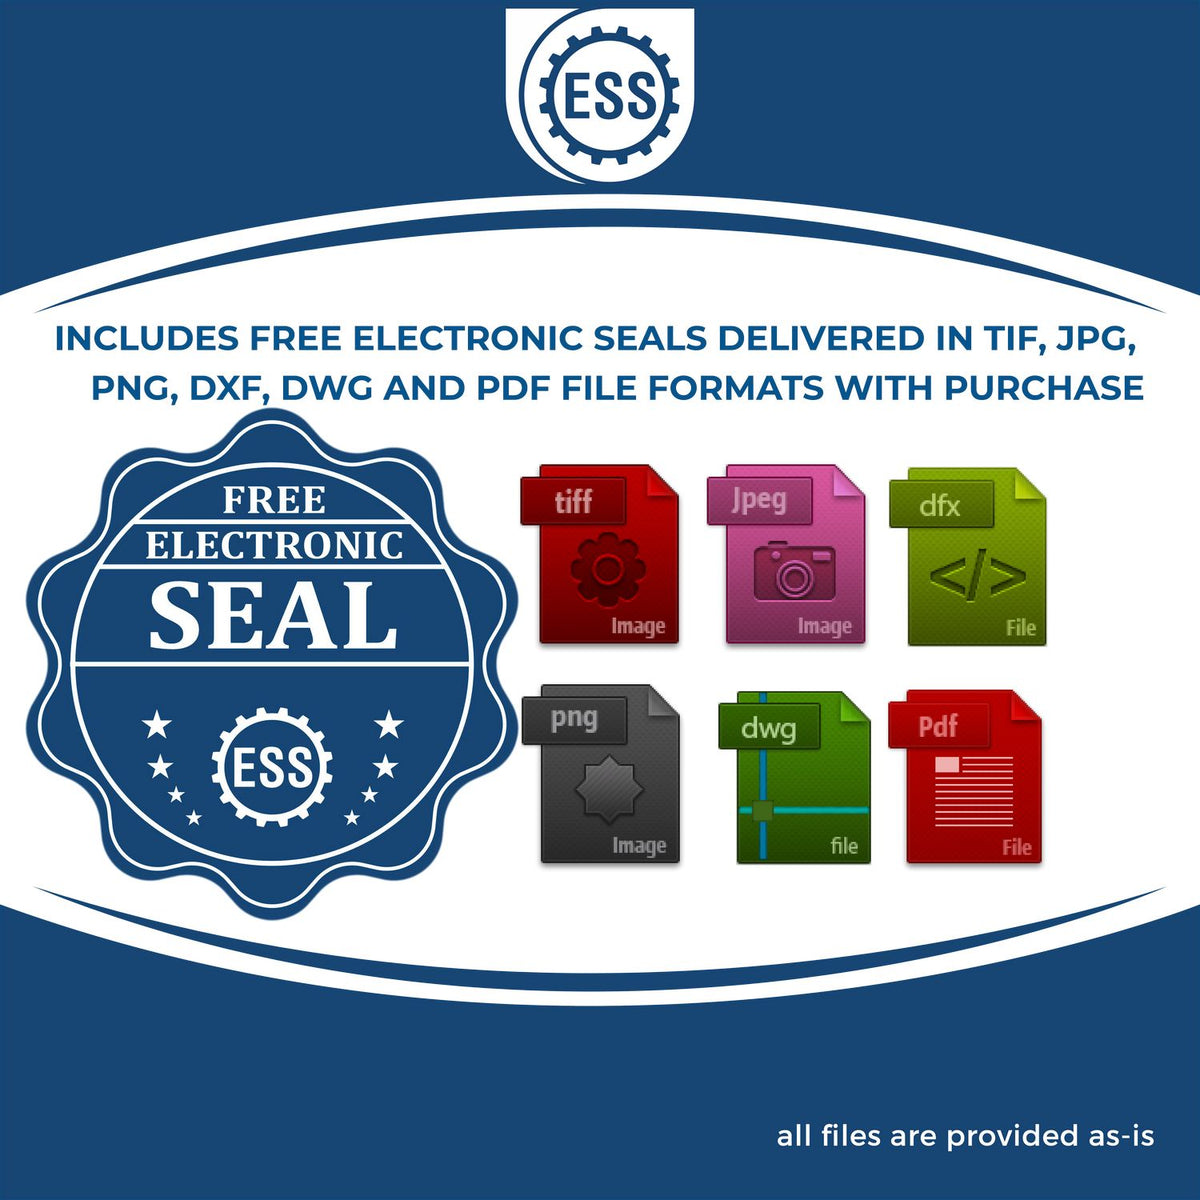 An infographic for the free electronic seal for the State of Hawaii Extended Long Reach Geologist Seal illustrating the different file type icons such as DXF, DWG, TIF, JPG and PNG.